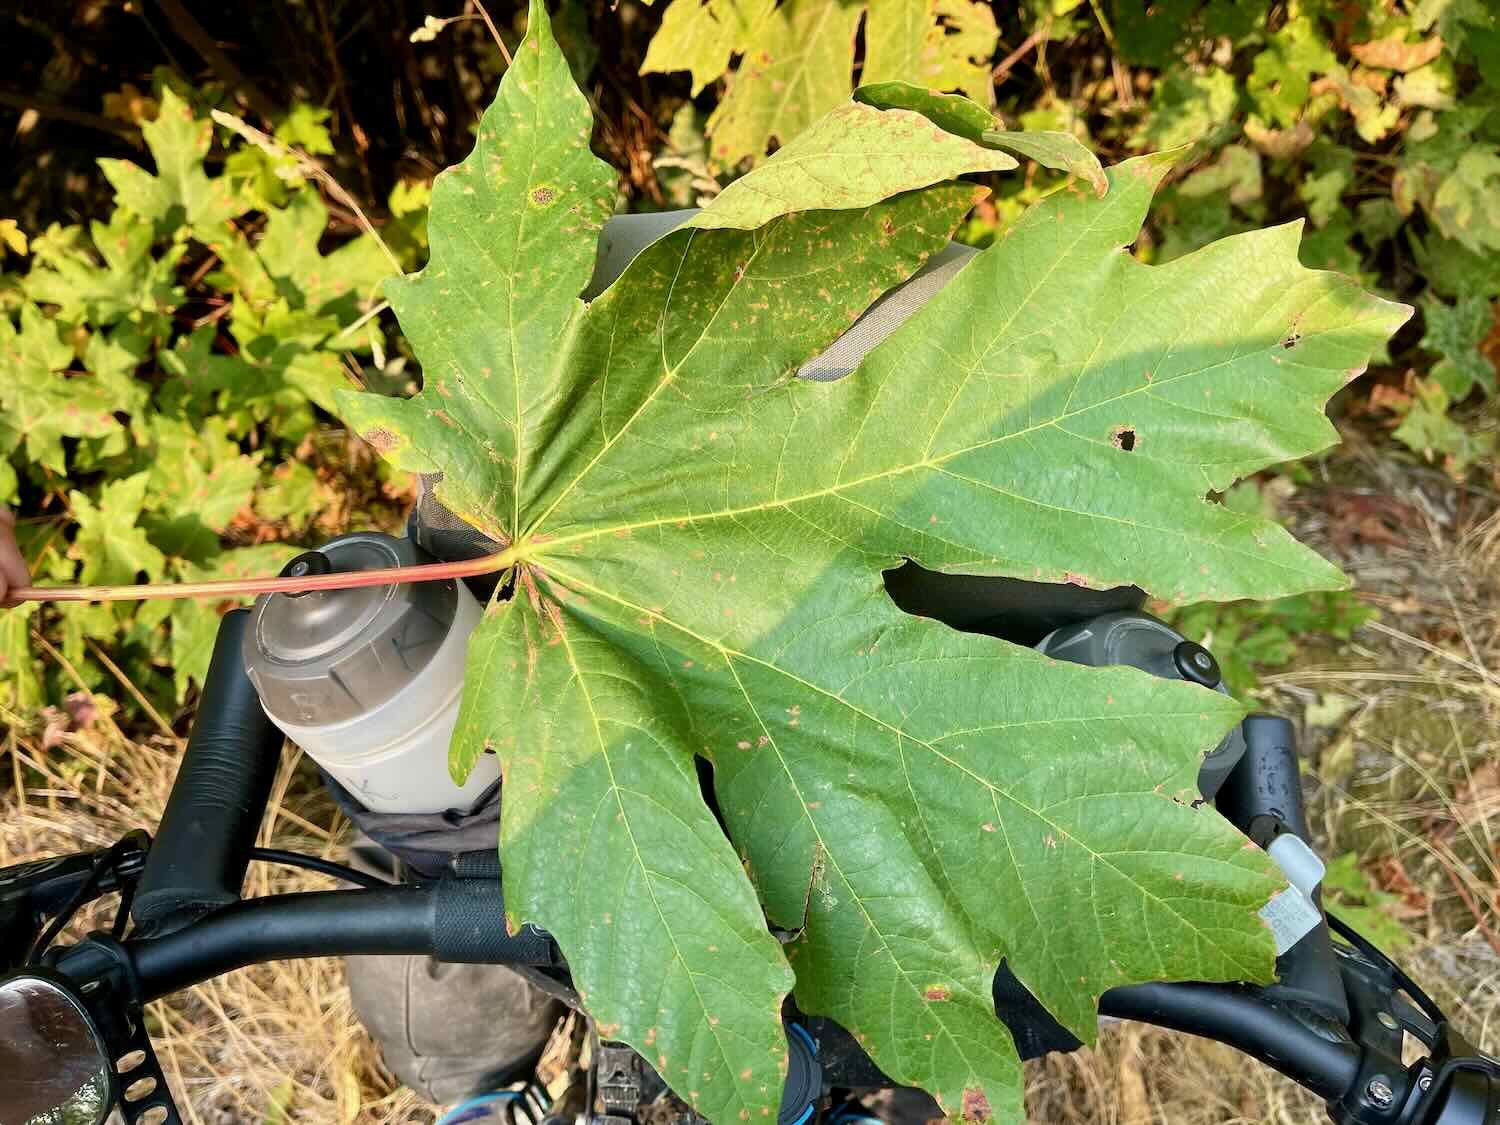 A giant leaf from a bigleaf maple completely covers a handlebar bag